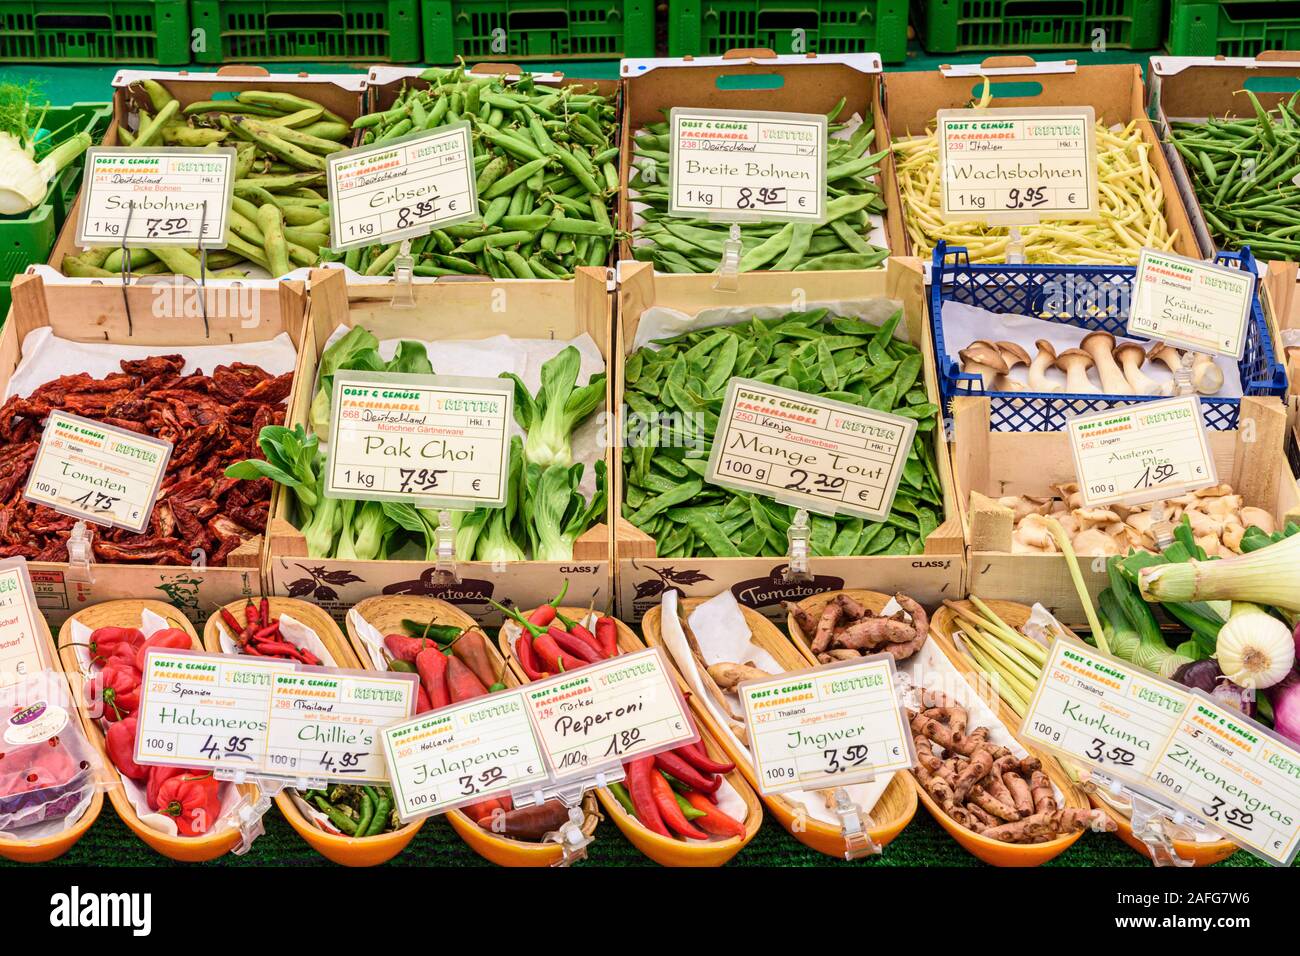 Boxes of fresh produce from around the world at a market stall in Munich, Germany Stock Photo